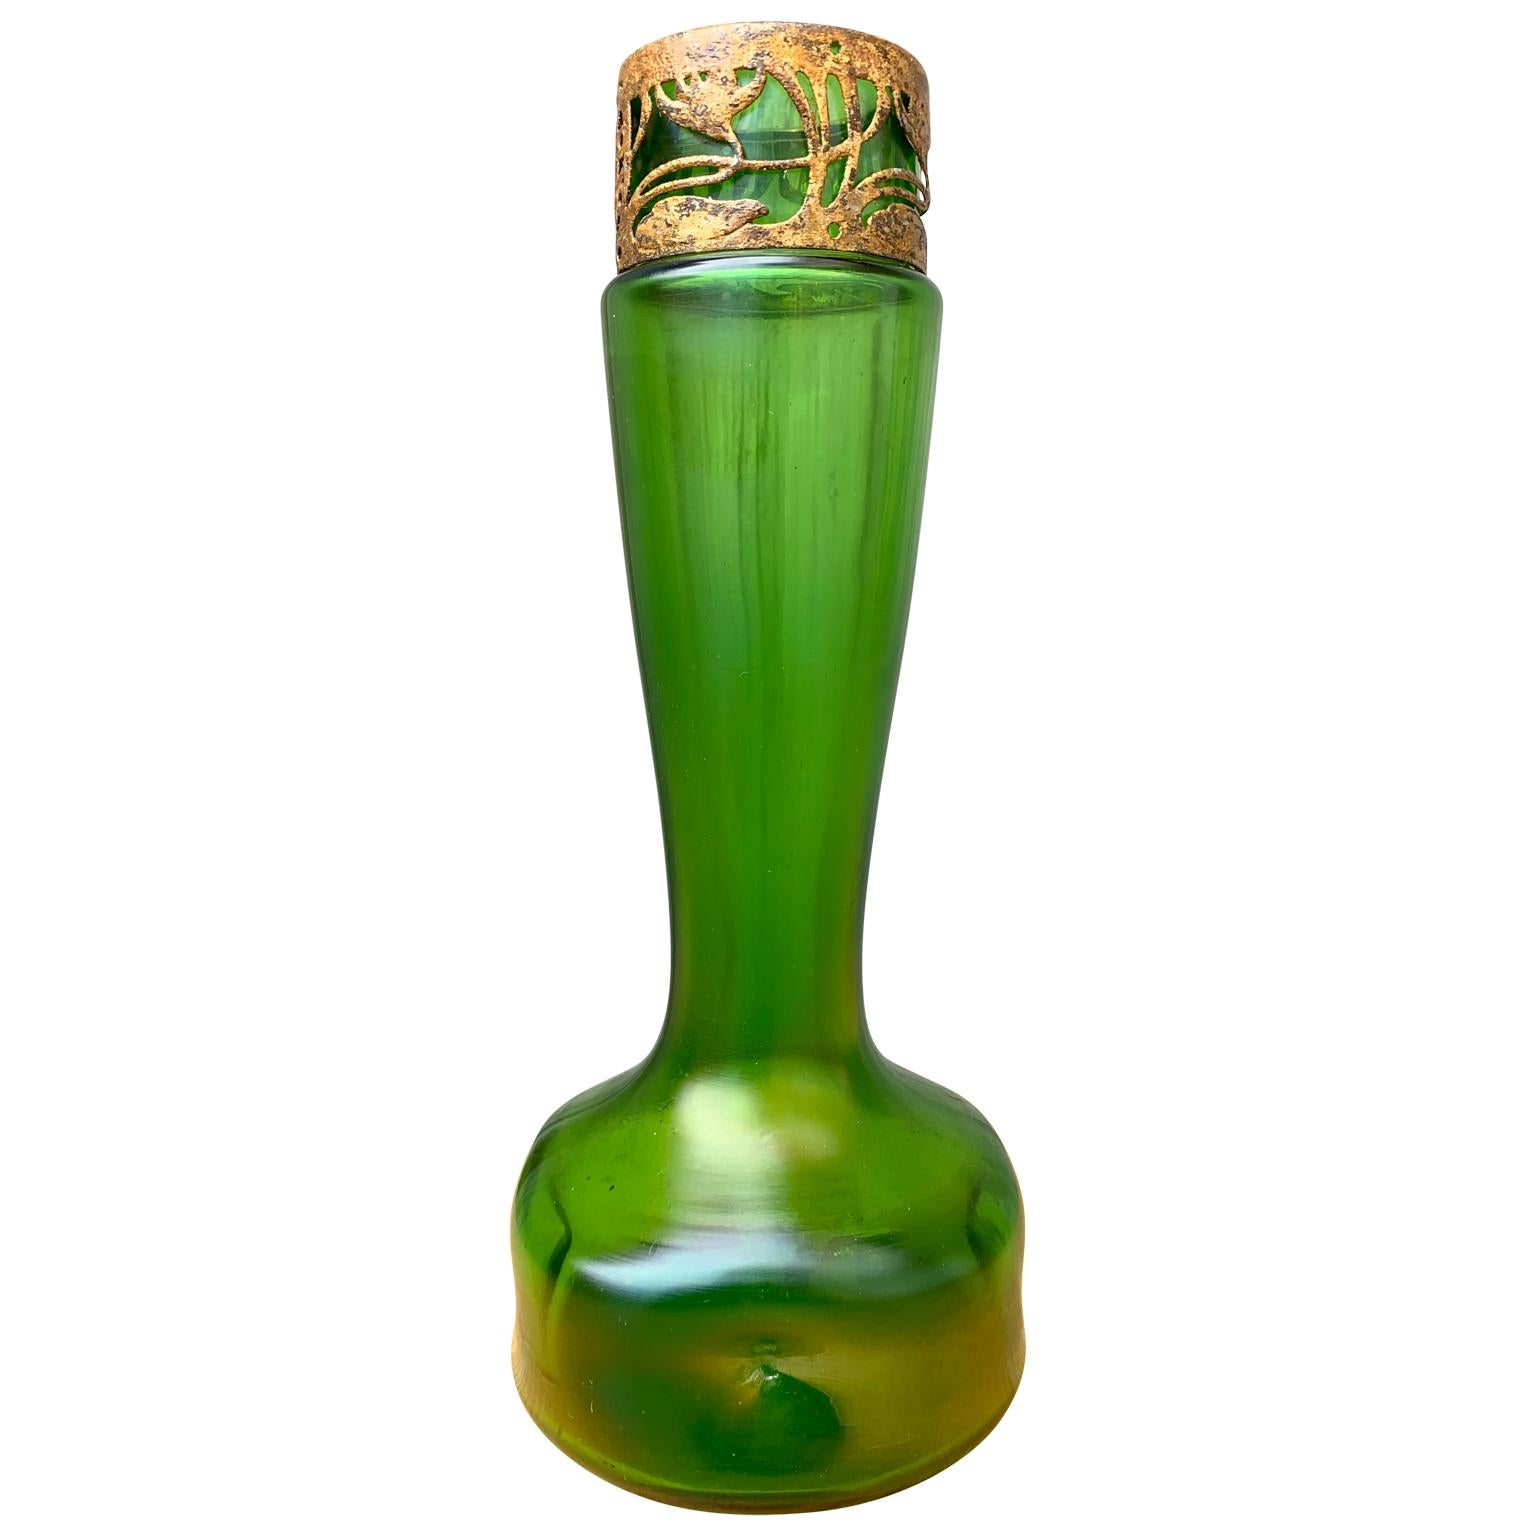 20th Century Green Art Nouveau Glass Vase, French, Early 1900